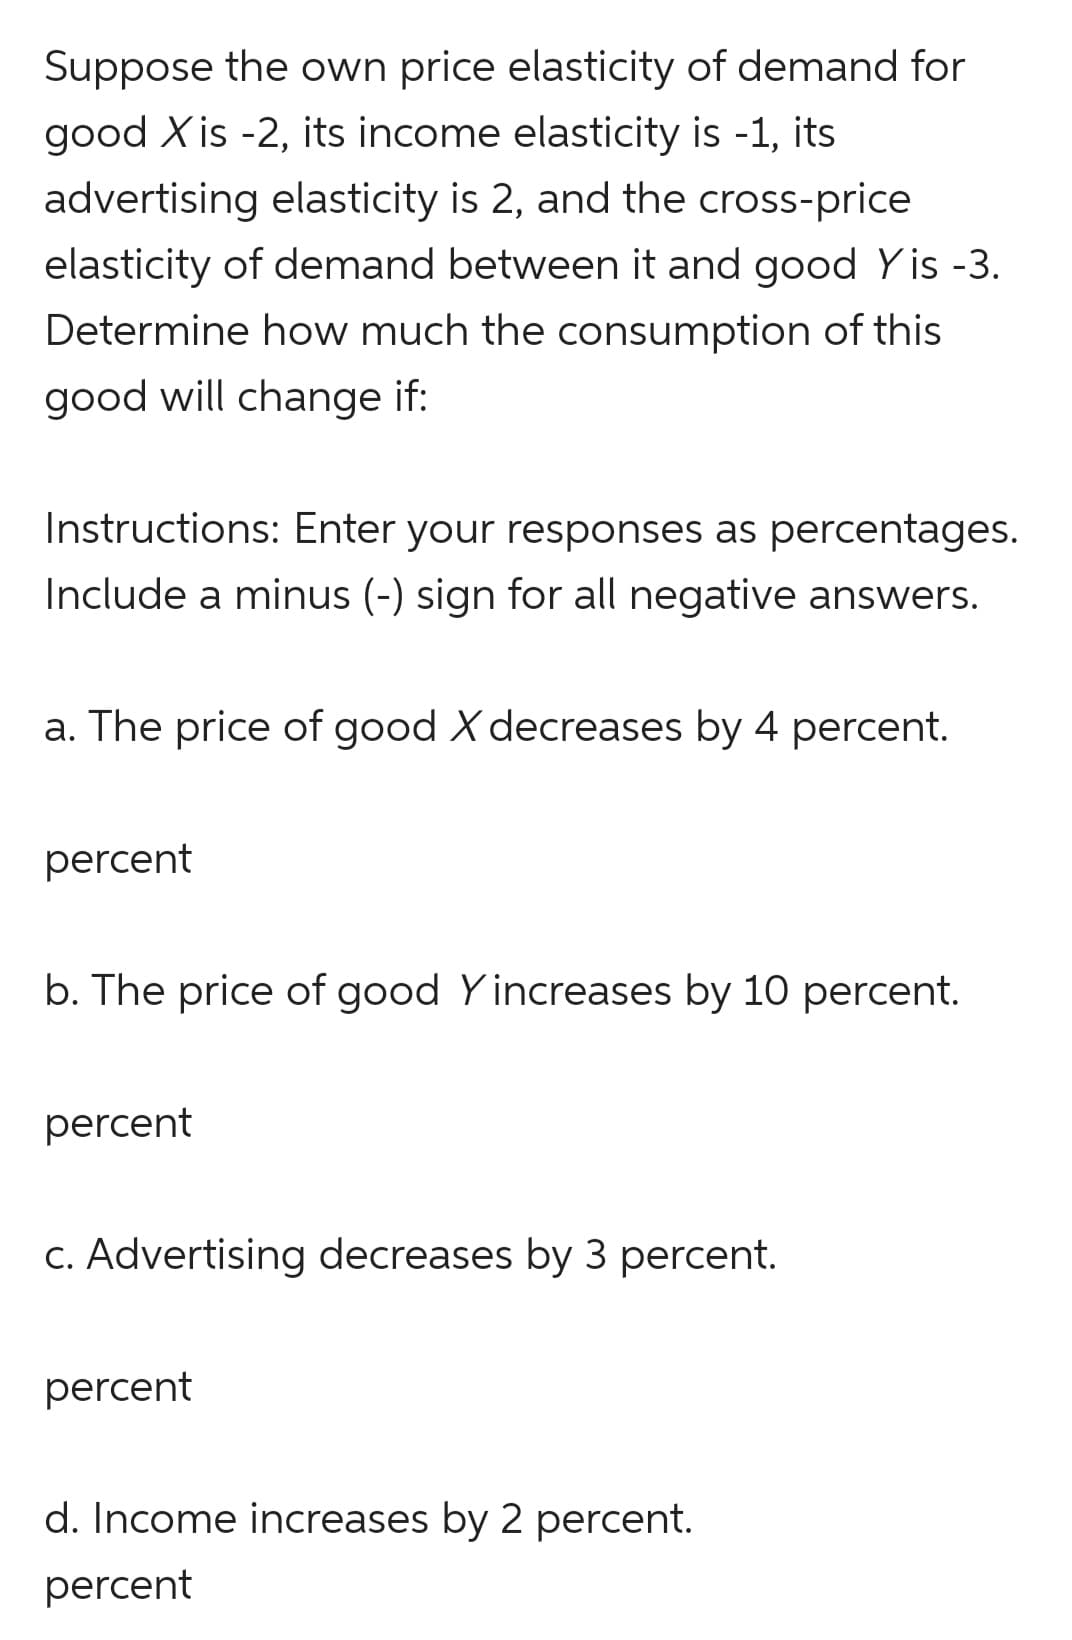 Suppose the own price elasticity of demand for
good X is -2, its income elasticity is -1, its
advertising elasticity is 2, and the cross-price
elasticity of demand between it and good Yis -3.
Determine how much the consumption of this
good will change if:
Instructions: Enter your responses as percentages.
Include a minus (-) sign for all negative answers.
a. The price of good X decreases by 4 percent.
percent
b. The price of good Yincreases by 10 percent.
percent
c. Advertising decreases by 3 percent.
percent
d. Income increases by 2 percent.
percent
